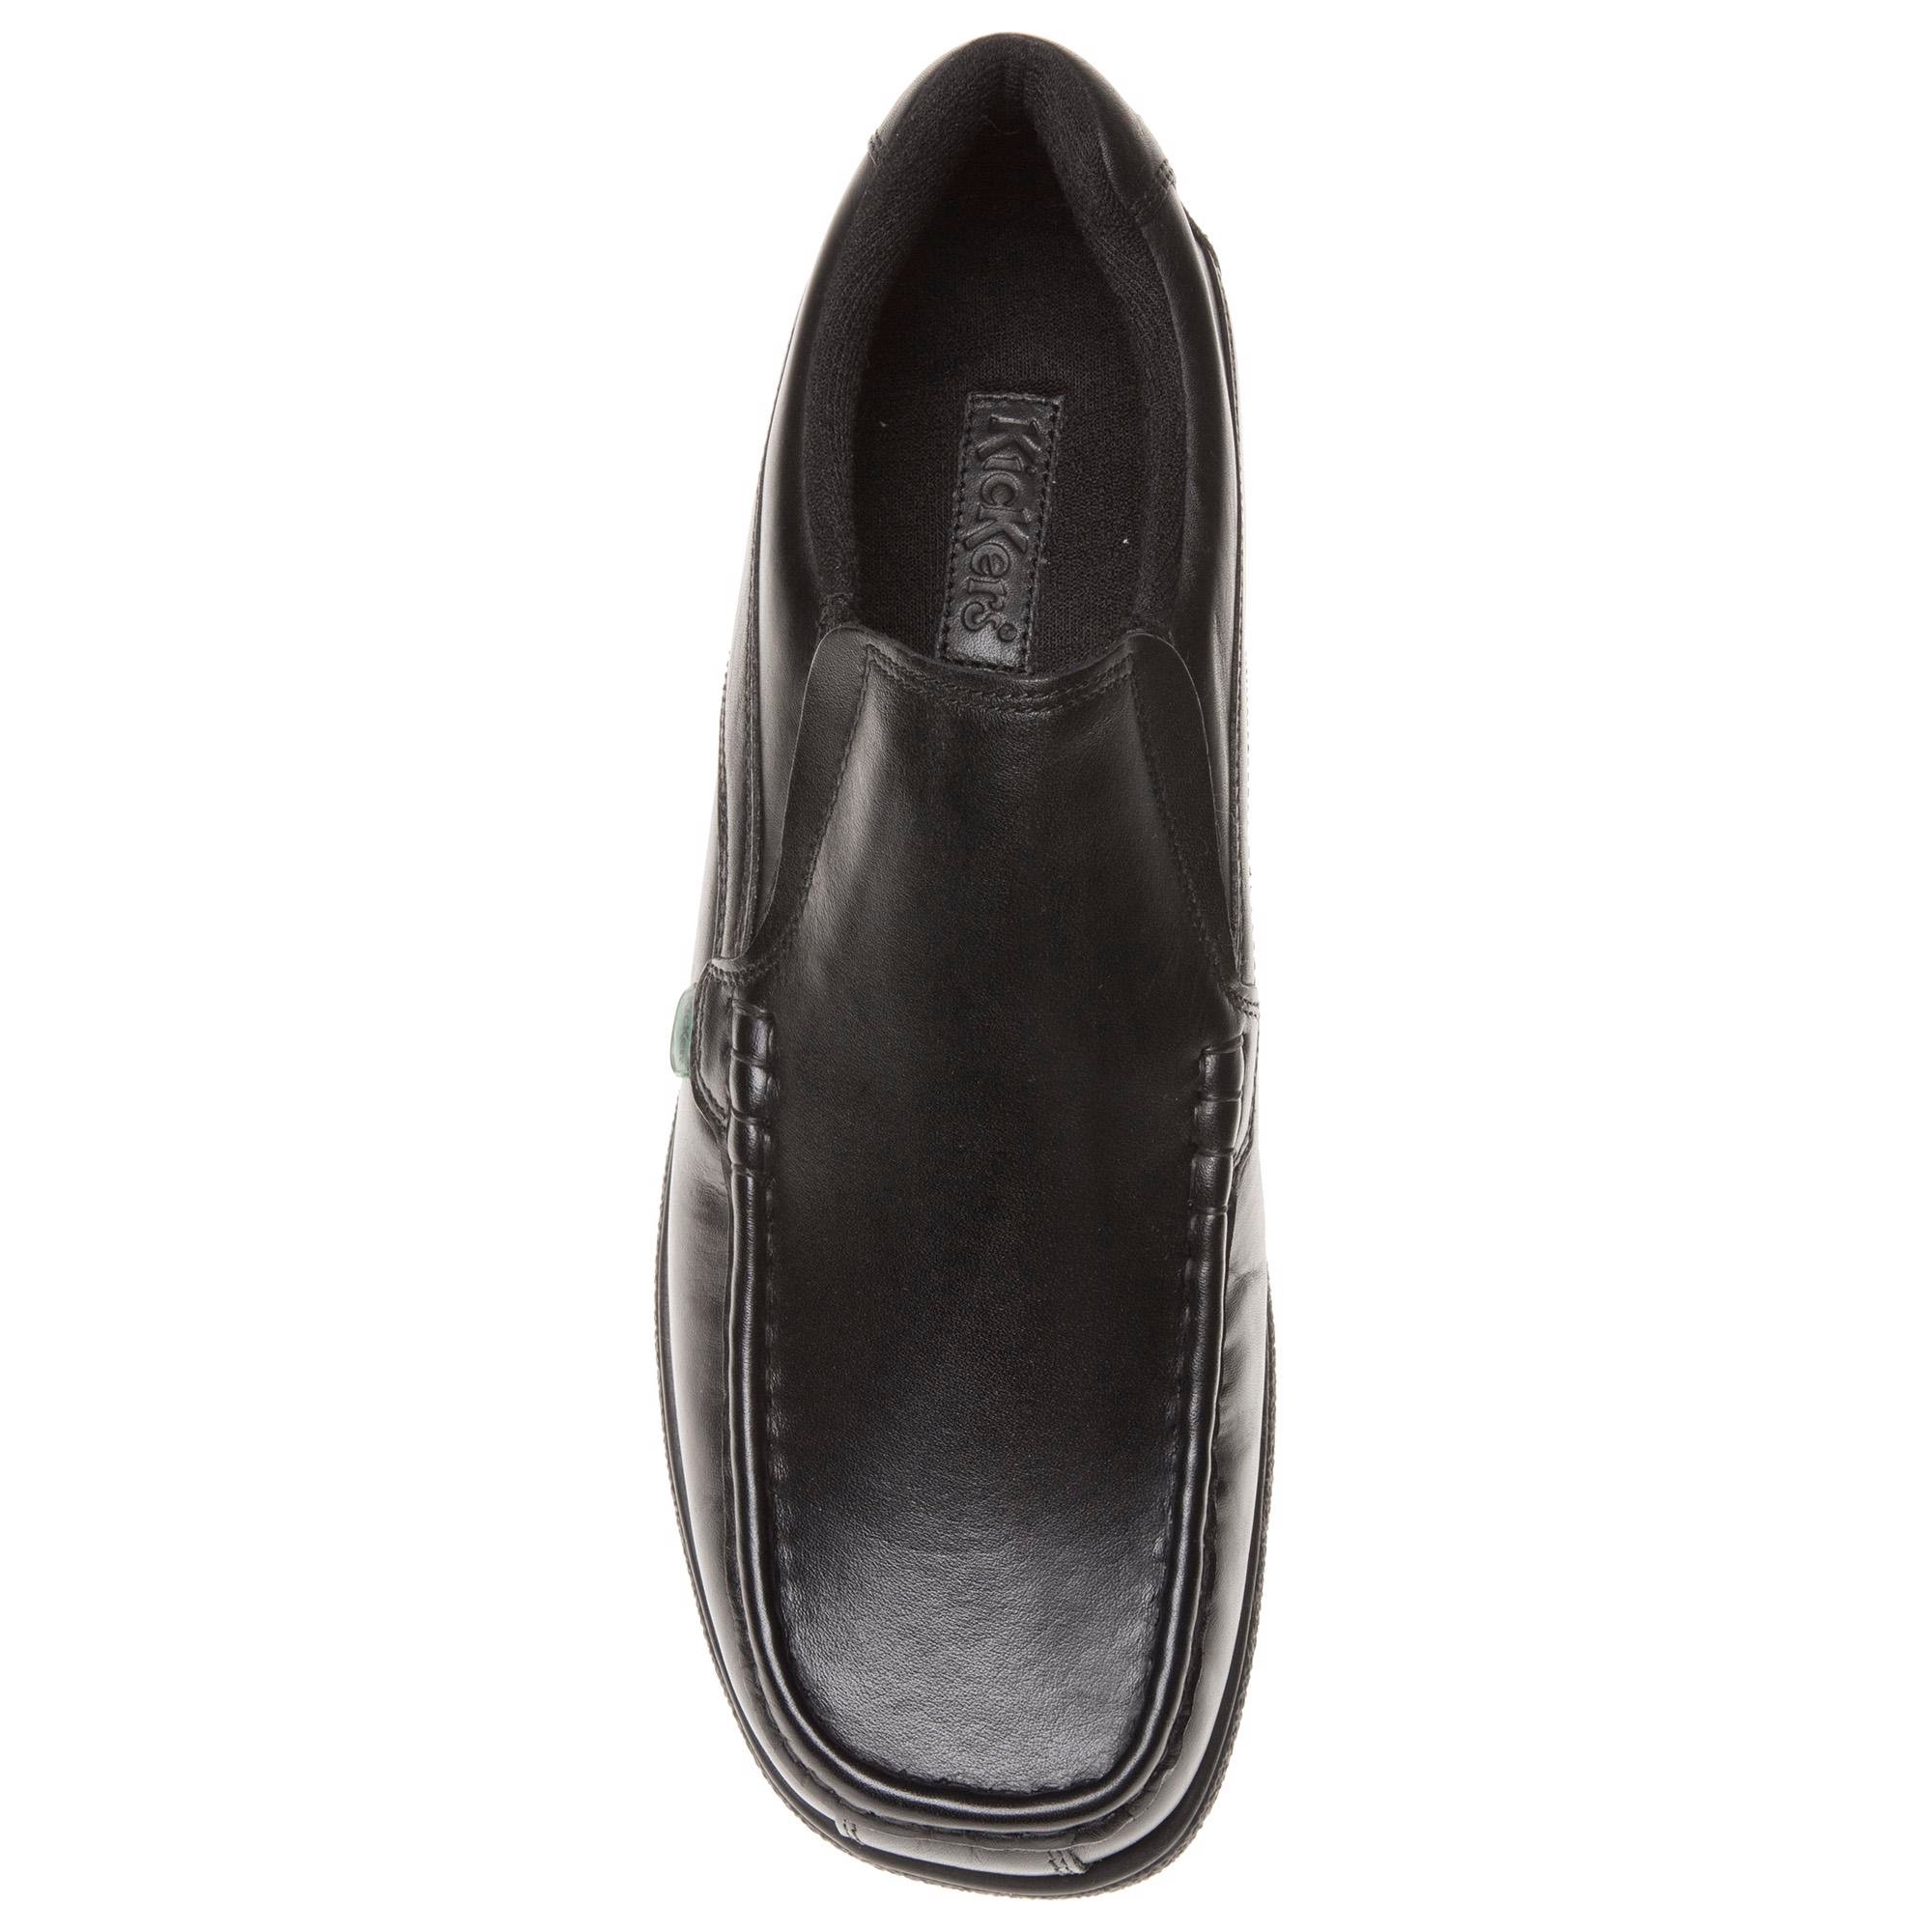 Kickers Kickers FRAGMA15 SLIP MEN Smooth Leather Smart Loafer School Shoes Black SIZE 10 5034856459618 